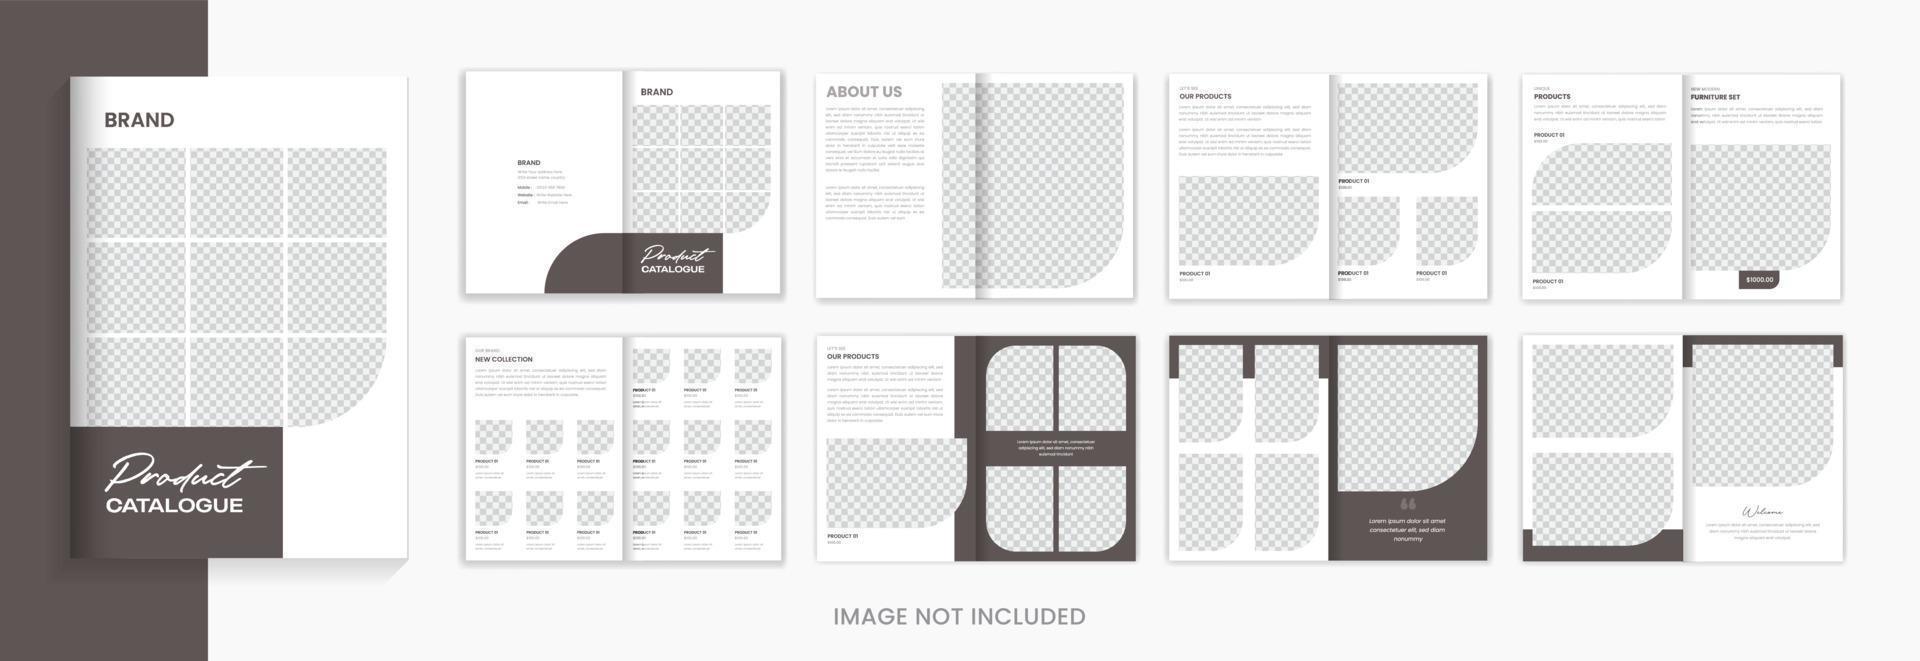 minimal brown 16 pages product catalog brochure design template vector